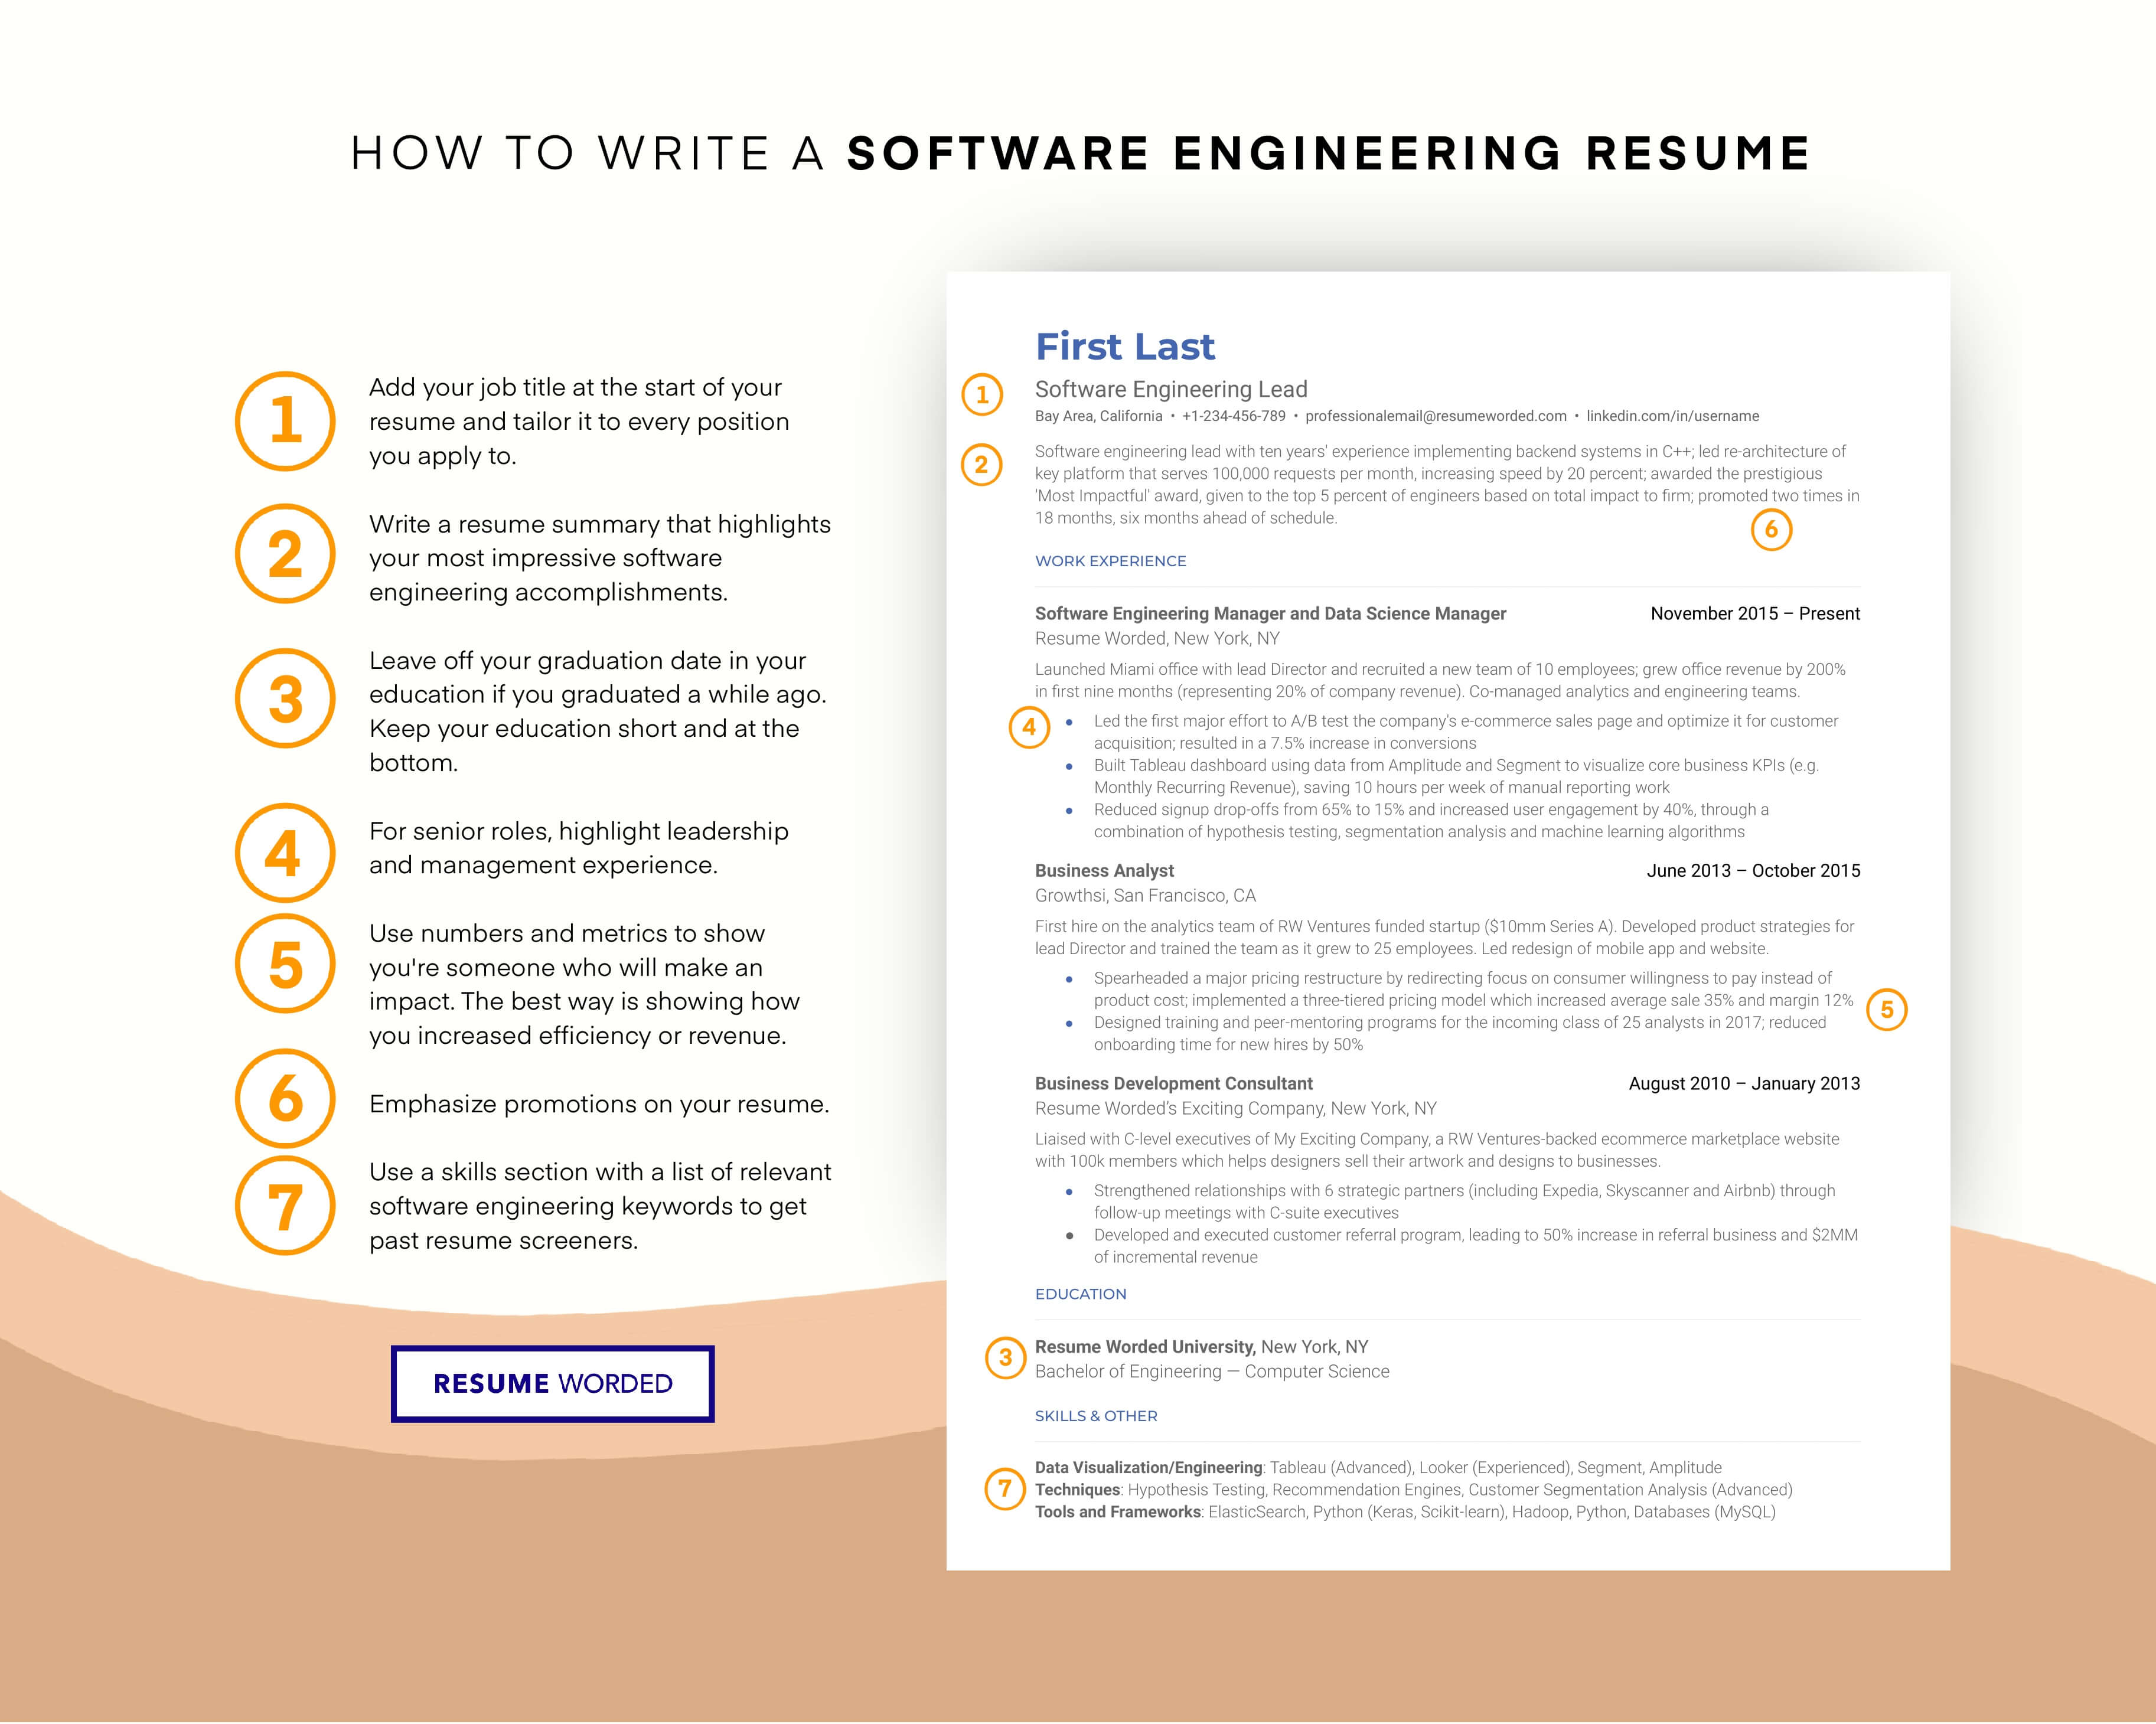 Include Scrum software you are familiar with in the skills section. - Agile Scrum Master Resume